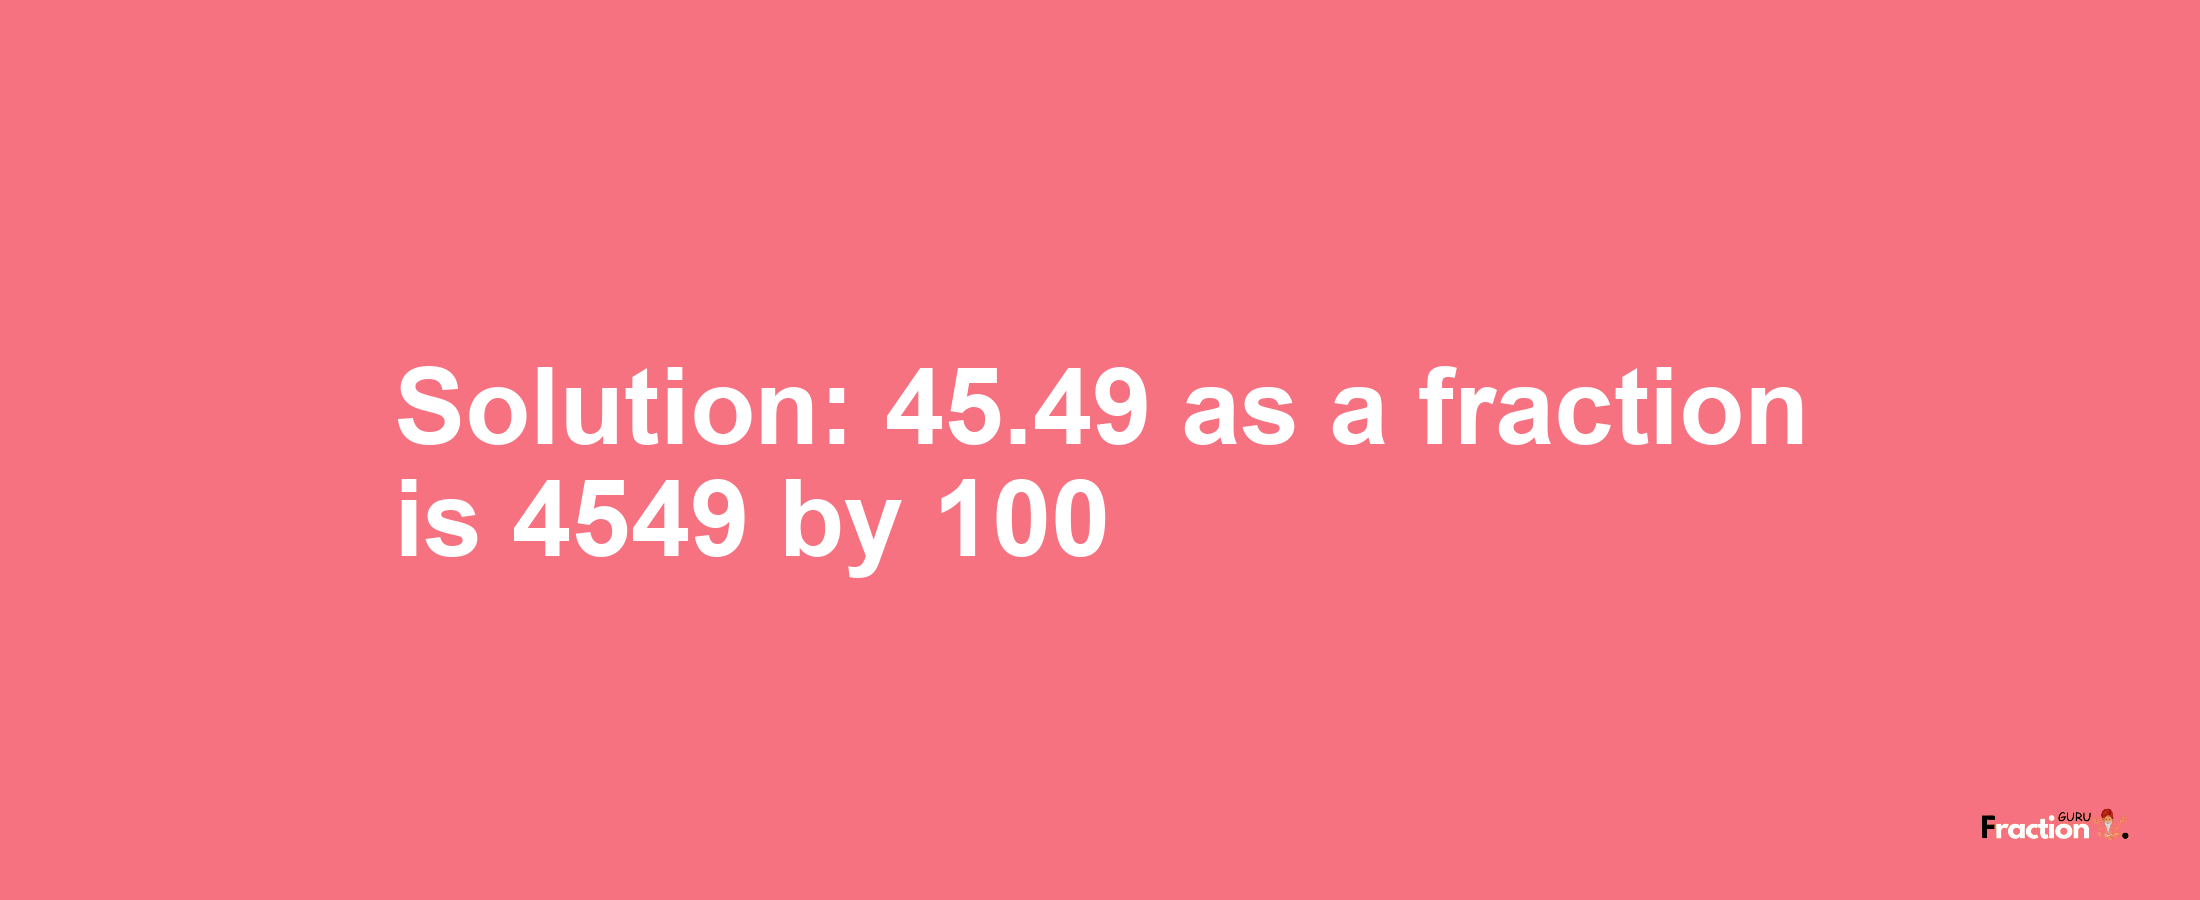 Solution:45.49 as a fraction is 4549/100